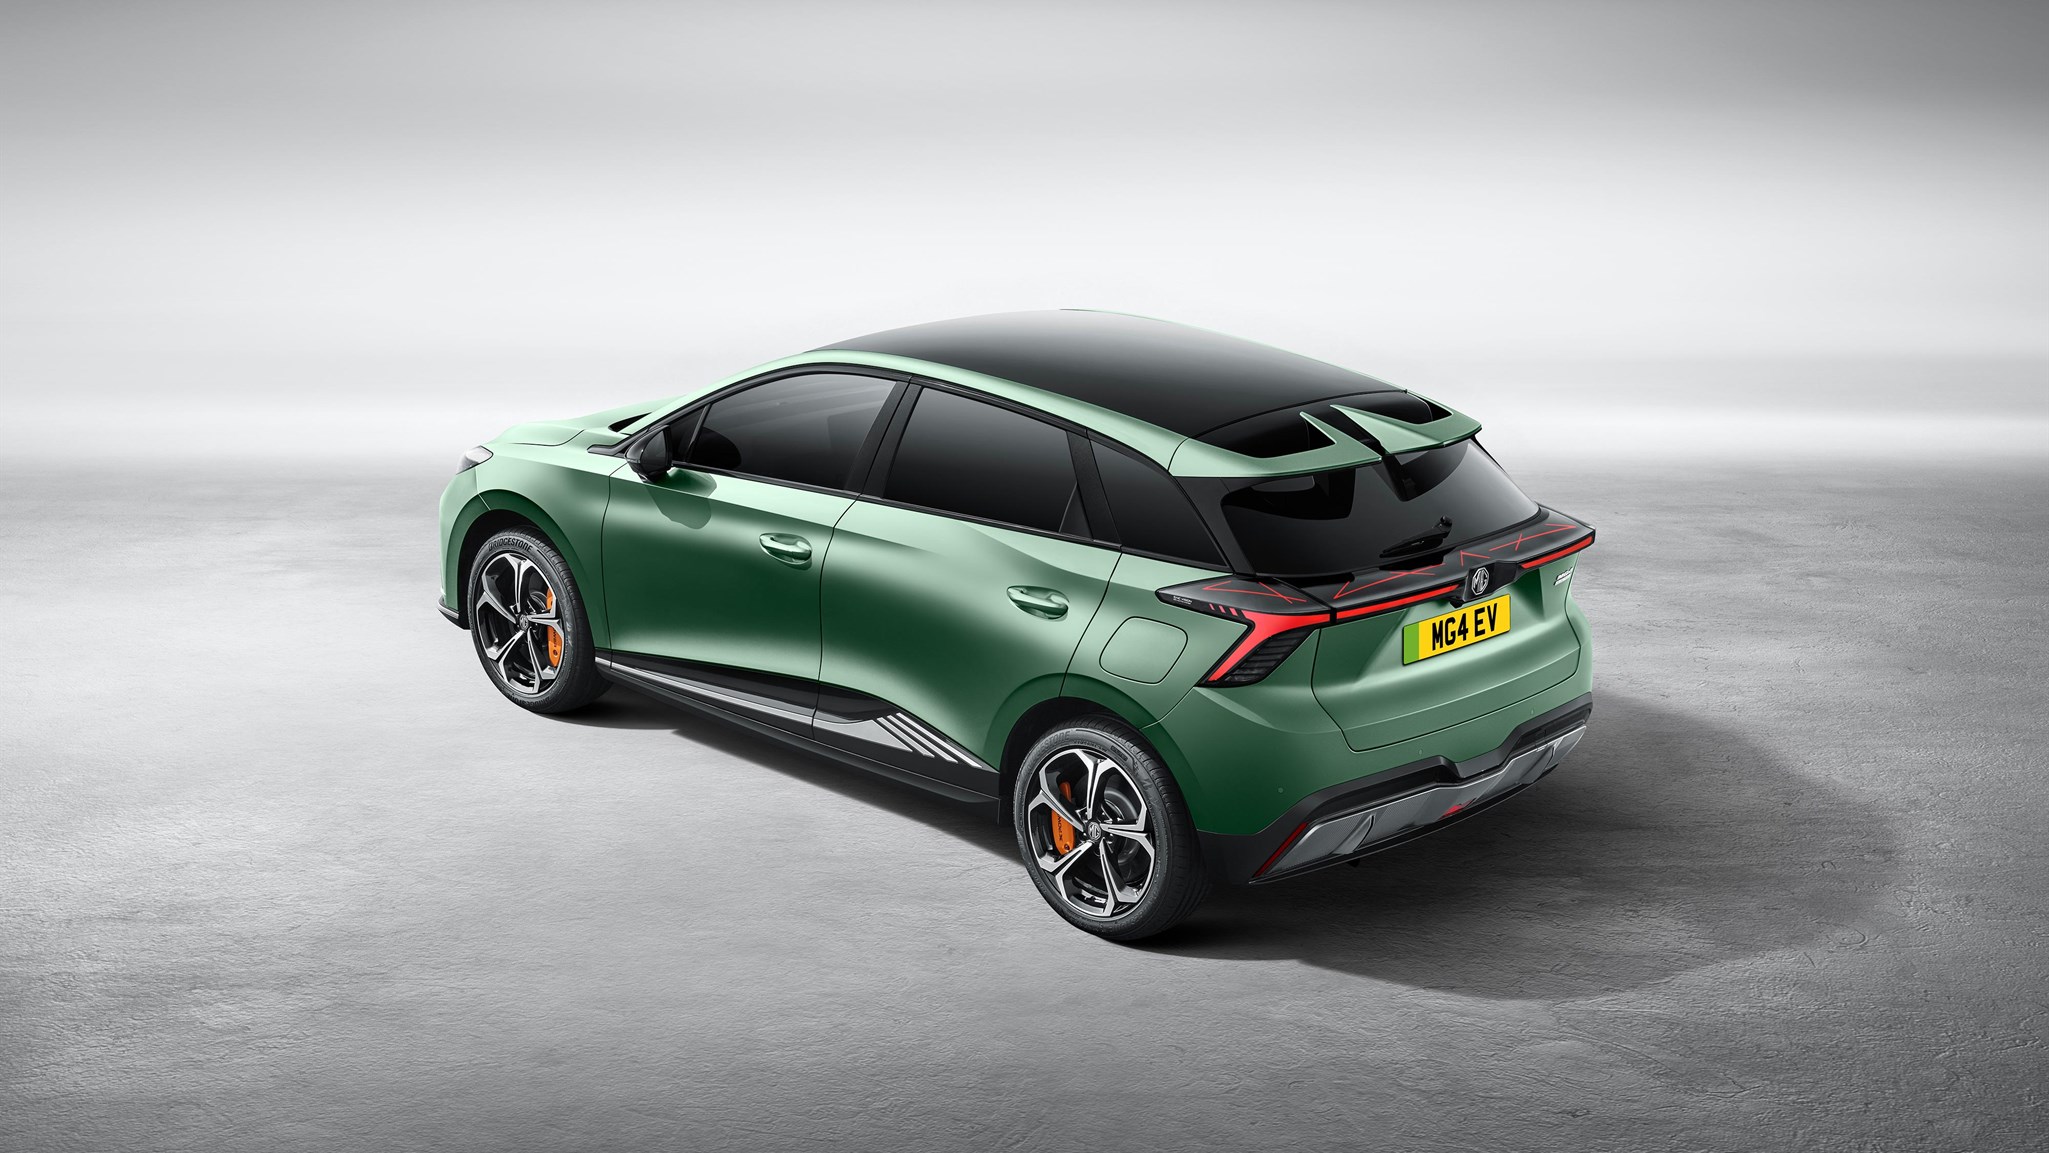 New 2023 MG4 XPower arrives as 429bhp electric hot hatch